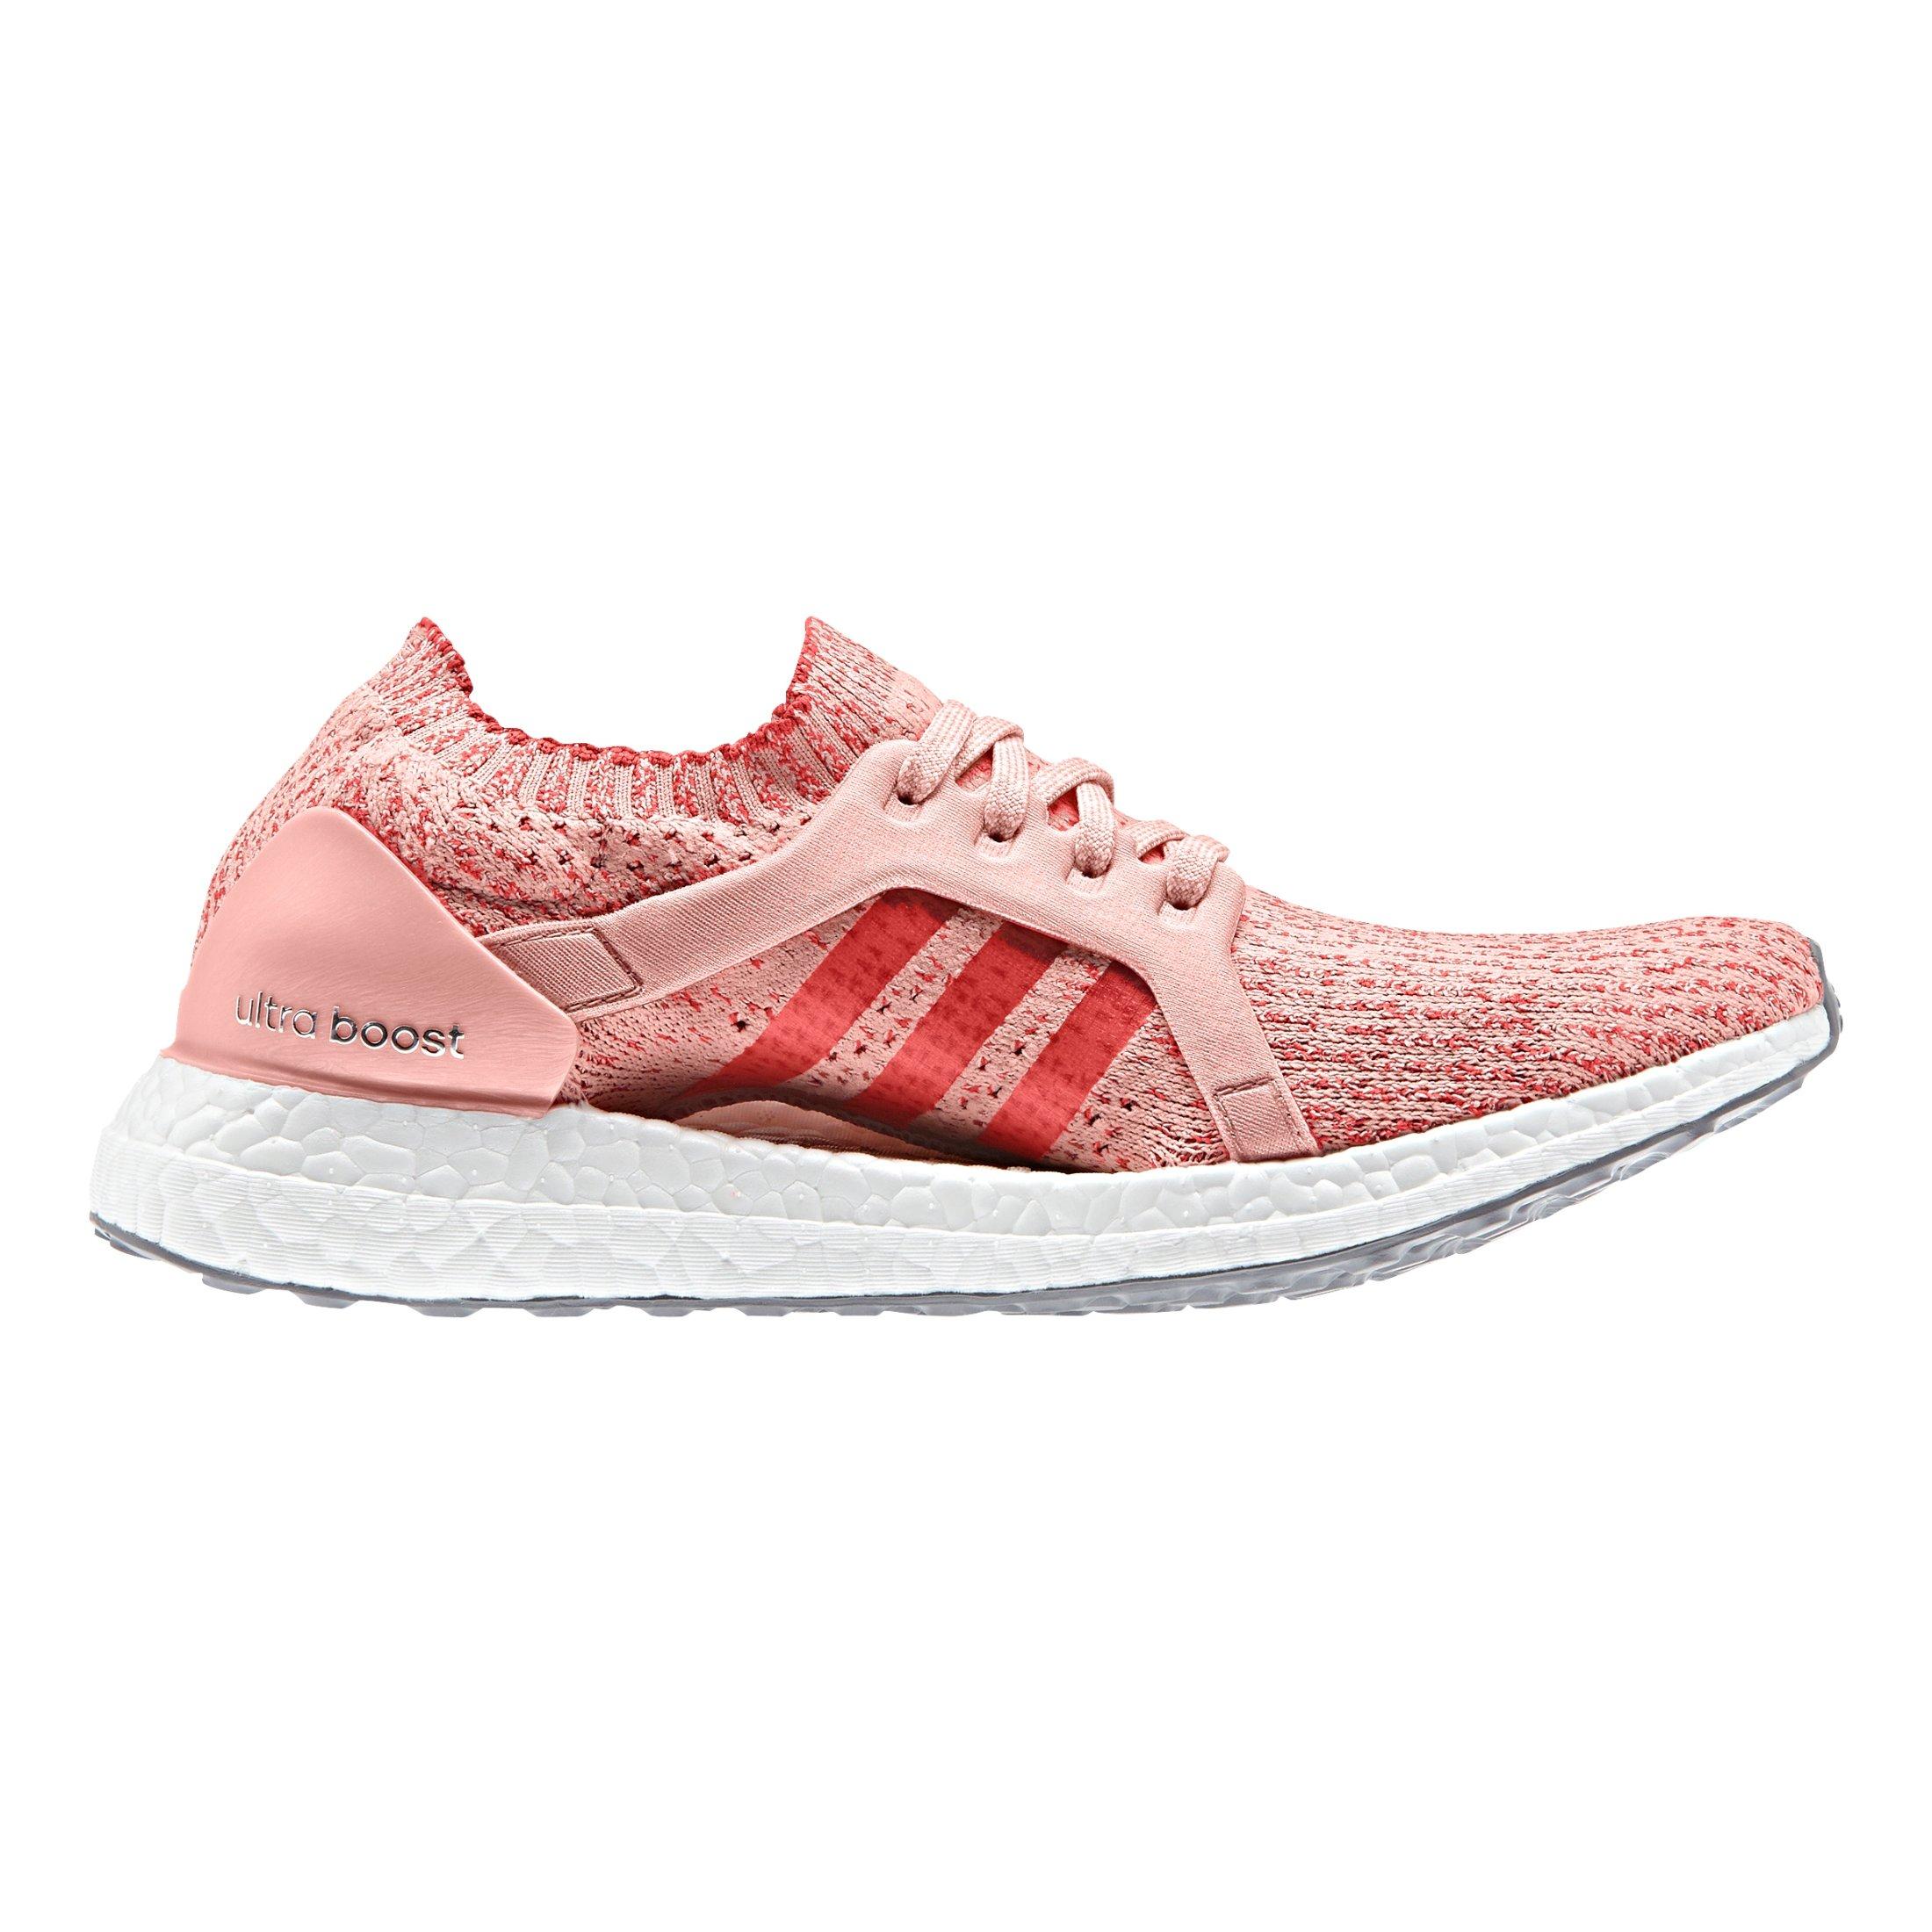 adidas pure boost x pink